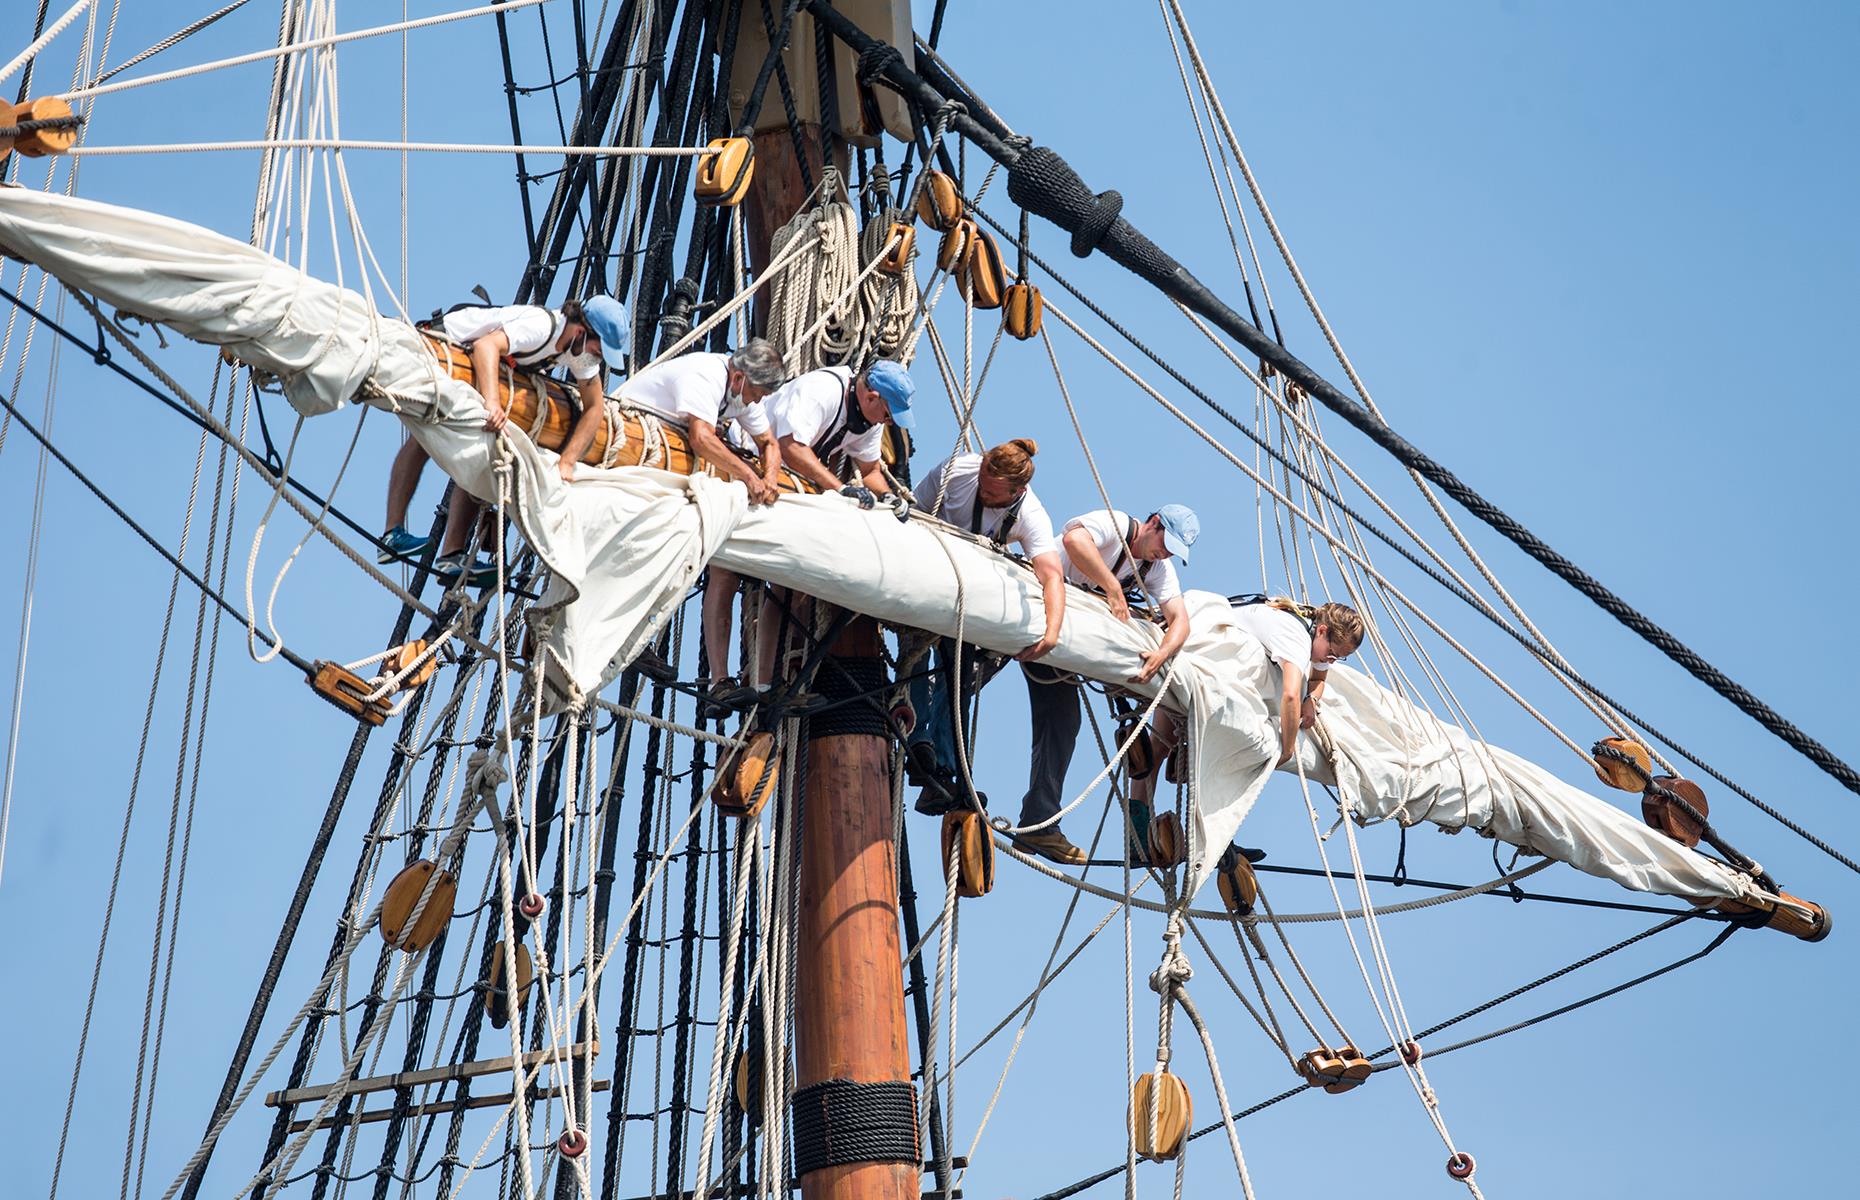 <p>The original vessel is long gone, likely sold off as scrap after her many voyages in the 1600s. Today, though, you can visit the Mayflower II – a full-scale replica of the tall ship built in Brixham, Devon, England and sailed across the ocean in 1957. The replica was fully restored for 2020 as part of the 400-year anniversary celebrations, and it's now one of the main attractions at the living history museum, Plimouth Plantation (<a href="https://www.plimoth.org/">online booking is essential</a>). ​</p>